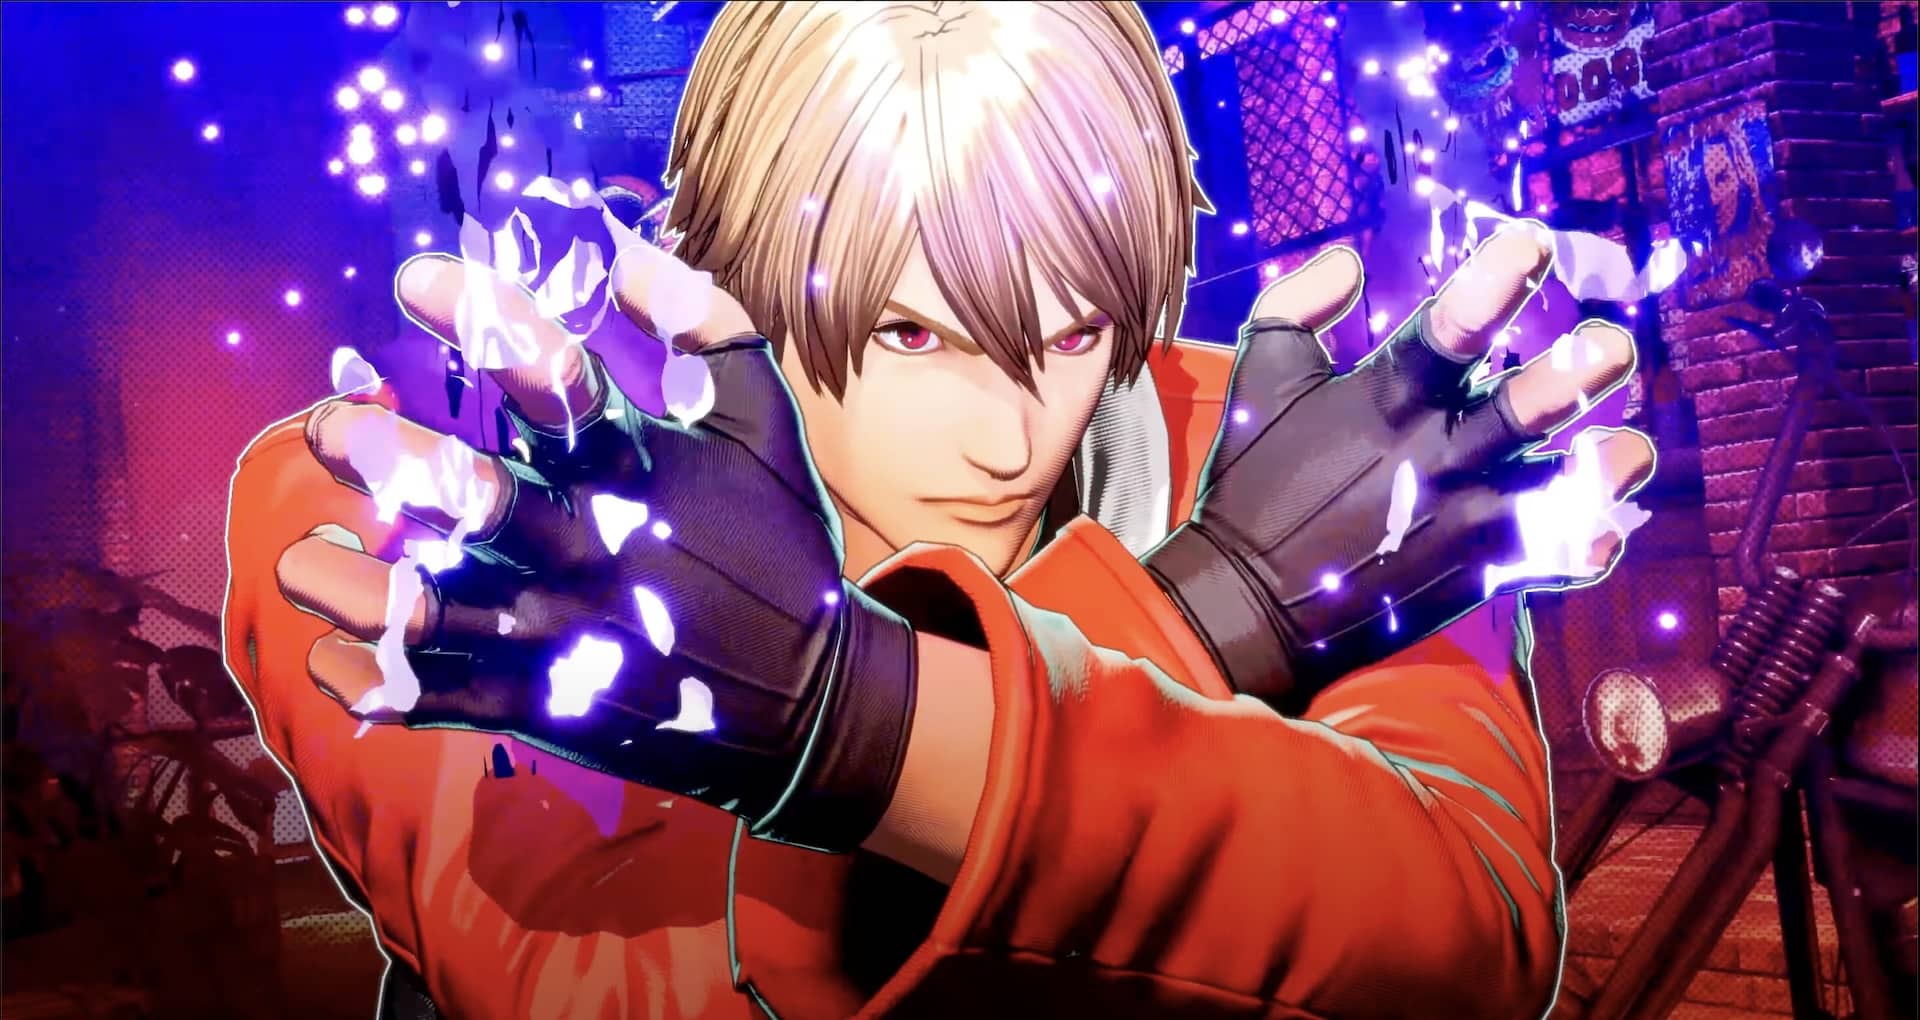 The King Of Fighters XIII Global Match Launches On Switch This